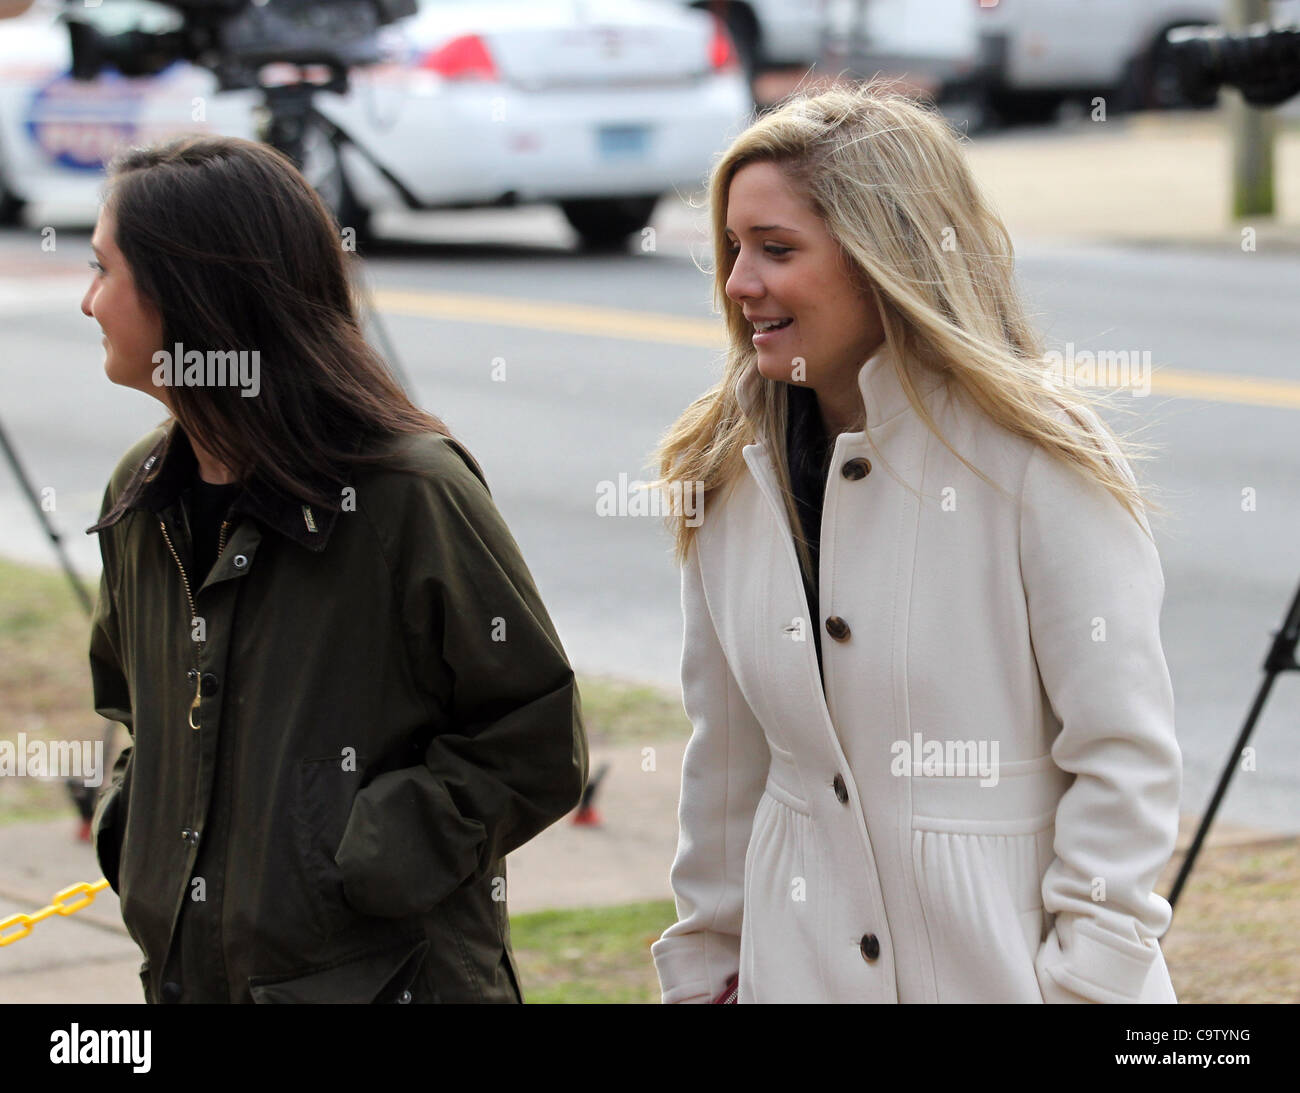 Feb. 18, 2012 - Charlottesville, Virginia, UNITED STATES - CHARLOTTESVILLE, VA - FEBRUARY 17:  Caroline Wattenmaker, left, and Kate Kamber, right, both testified they were at George Huguely's apartment when Yeardley Love argued and hit  Huguely over the head with her purse a week prior to her murder Stock Photo